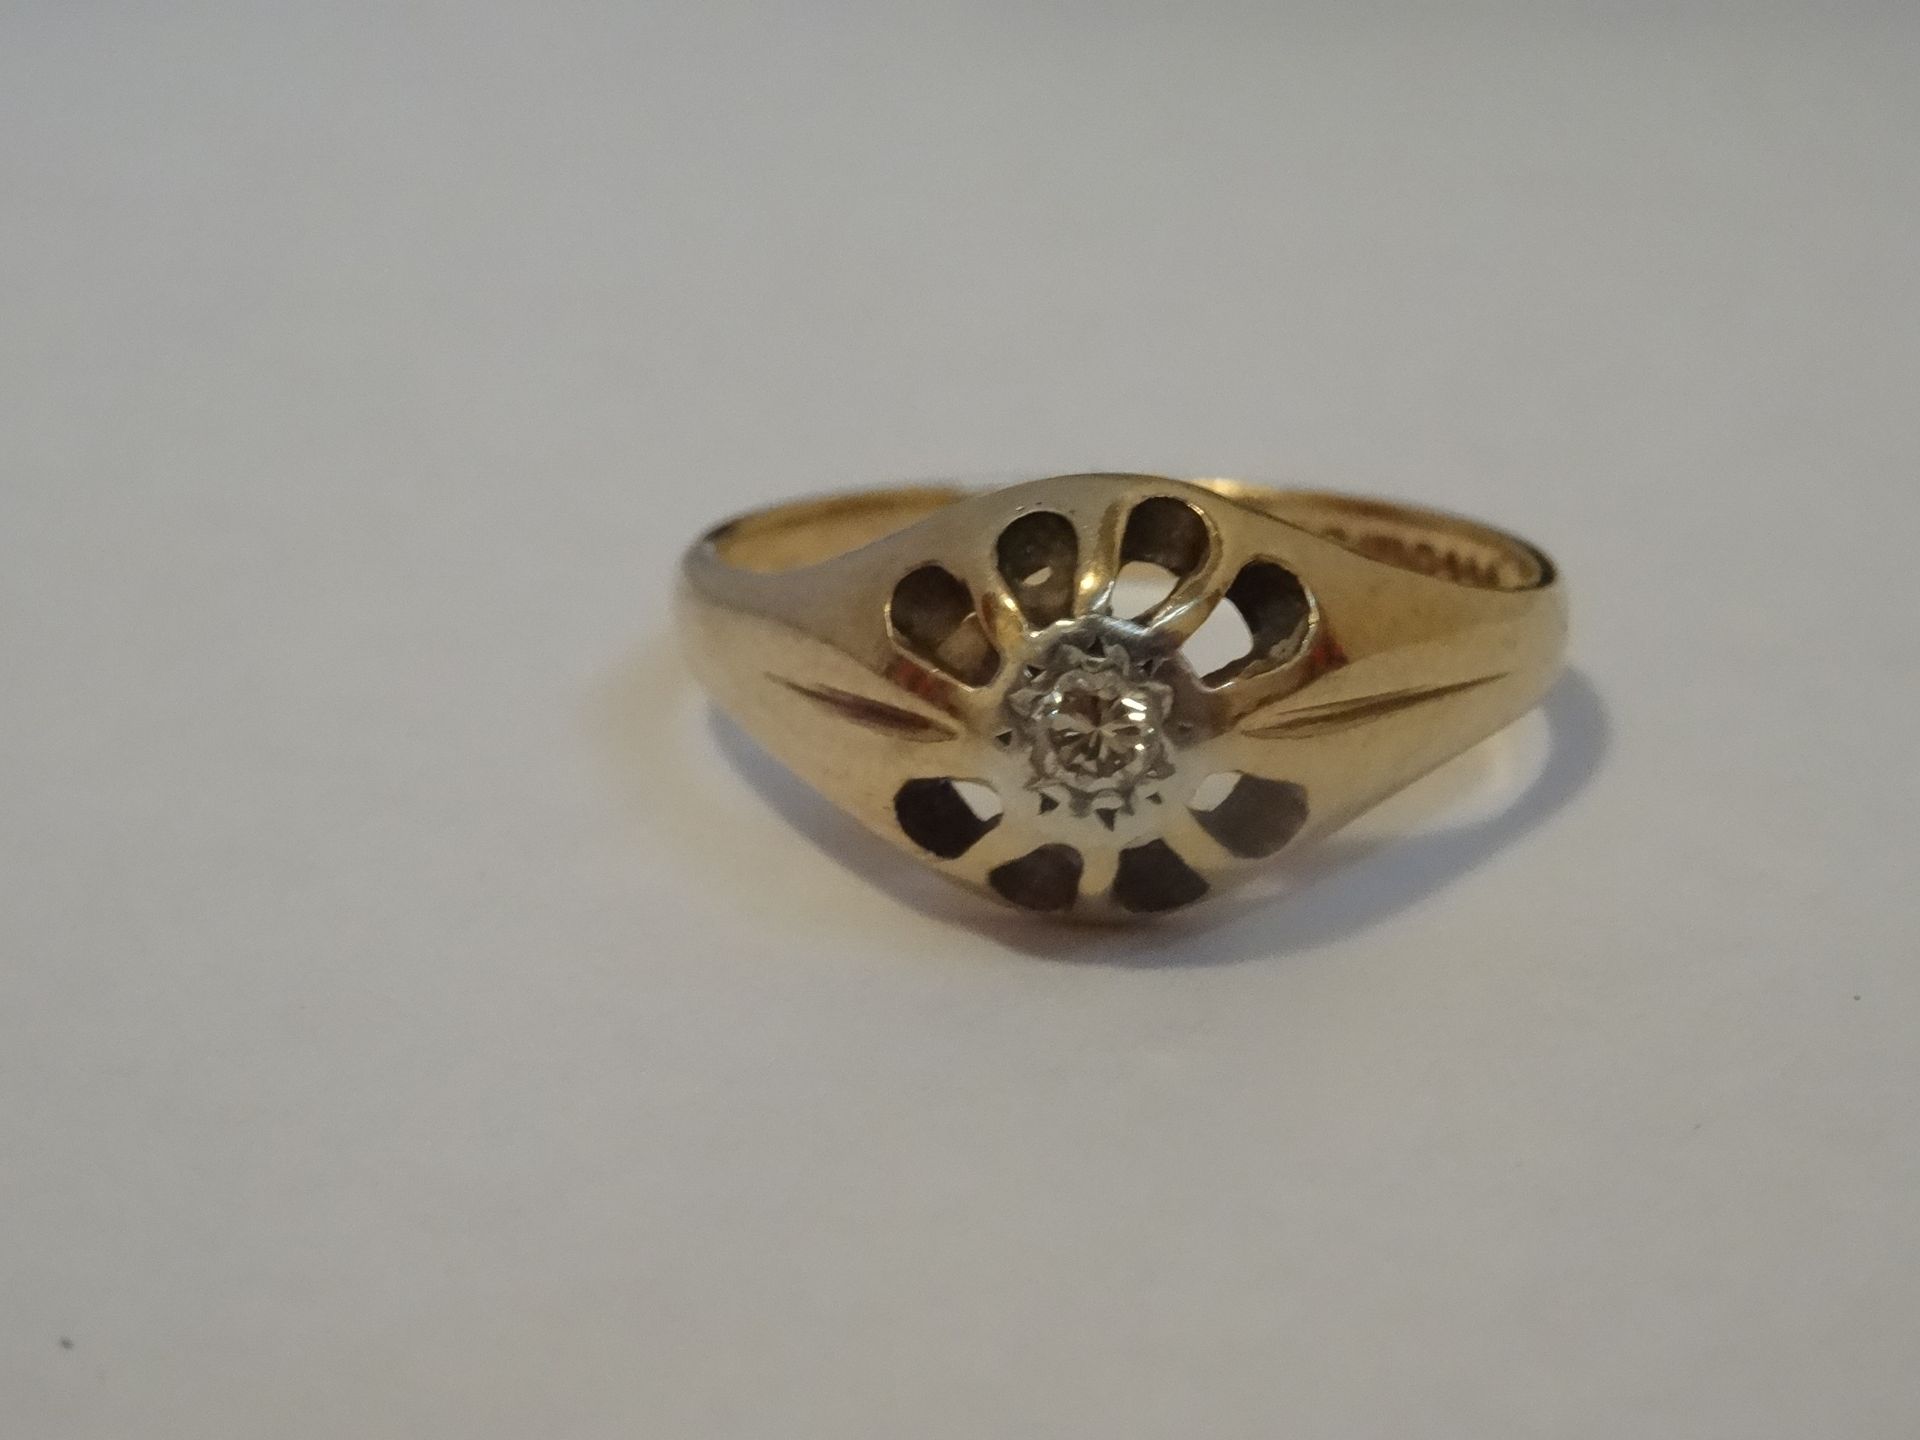 9 Carat Yellow Gold Single Stone Claw Design Ring. Total Piece Weight 2.73 Grams - Image 3 of 3